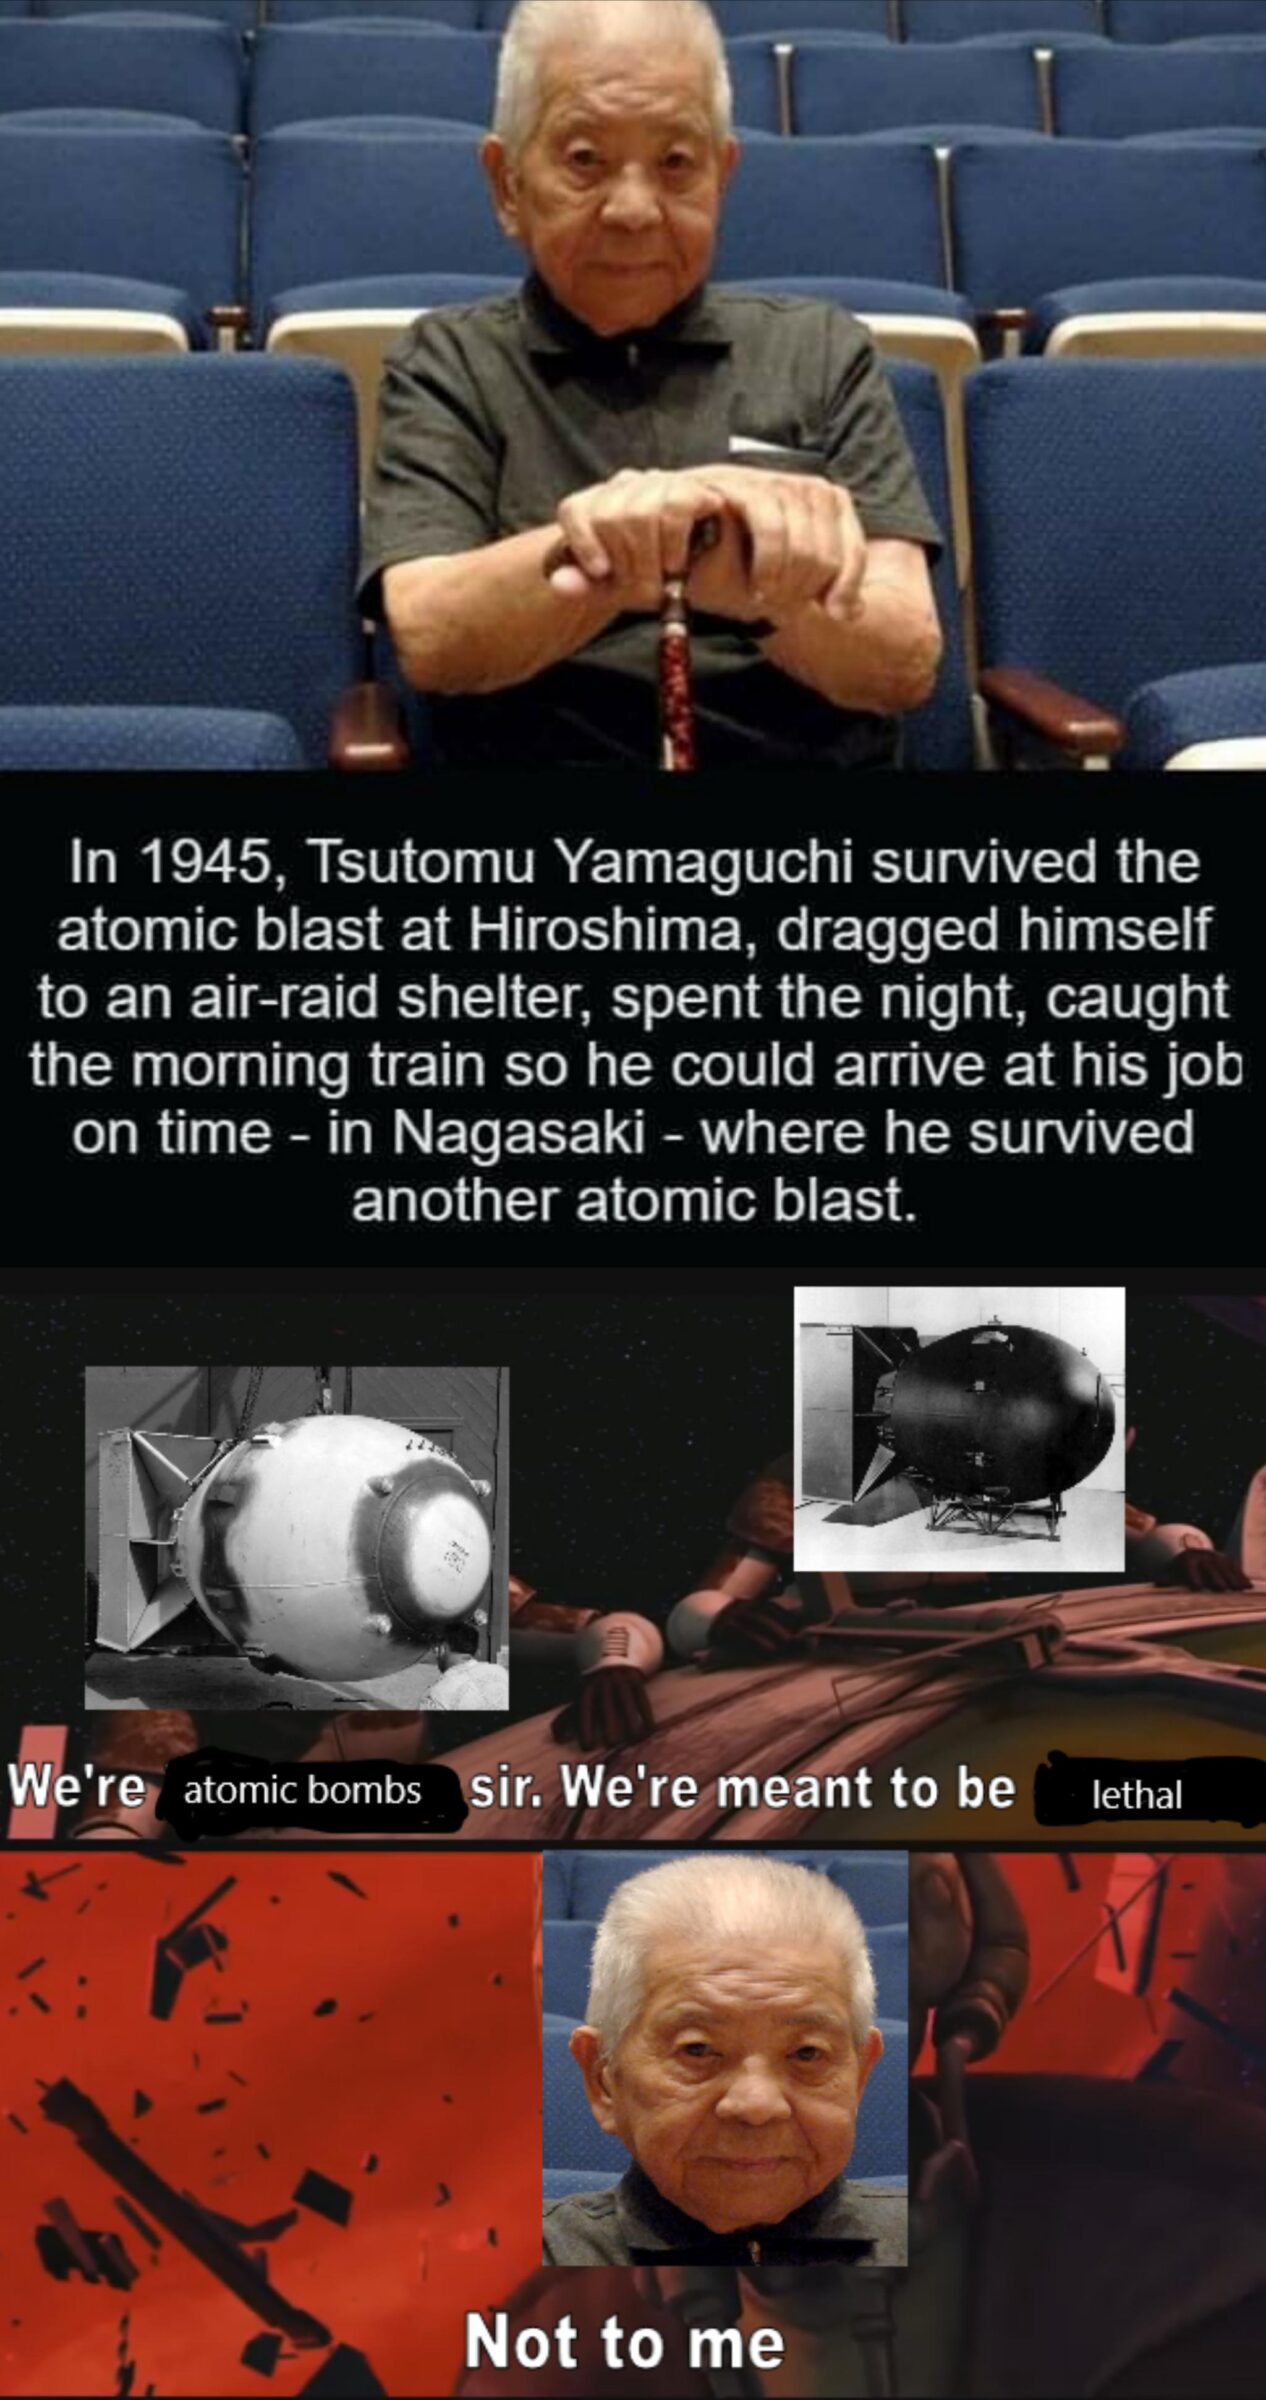 Prequel-memes, Nagasaki, Hiroshima, Japanese, Japan, Jedi Star Wars Memes Prequel-memes, Nagasaki, Hiroshima, Japanese, Japan, Jedi text: In 1945, Tsutomu Yamaguchi survived the atomic blast at Hiroshima, dragged himself to an air-raid shelter, spent the night, caught the morning train so he could arrive at his job on time - in Nagasaki - where he survived another atomic blast. We'ret atomic bombs sir. We're meant to be Not to me lethal 